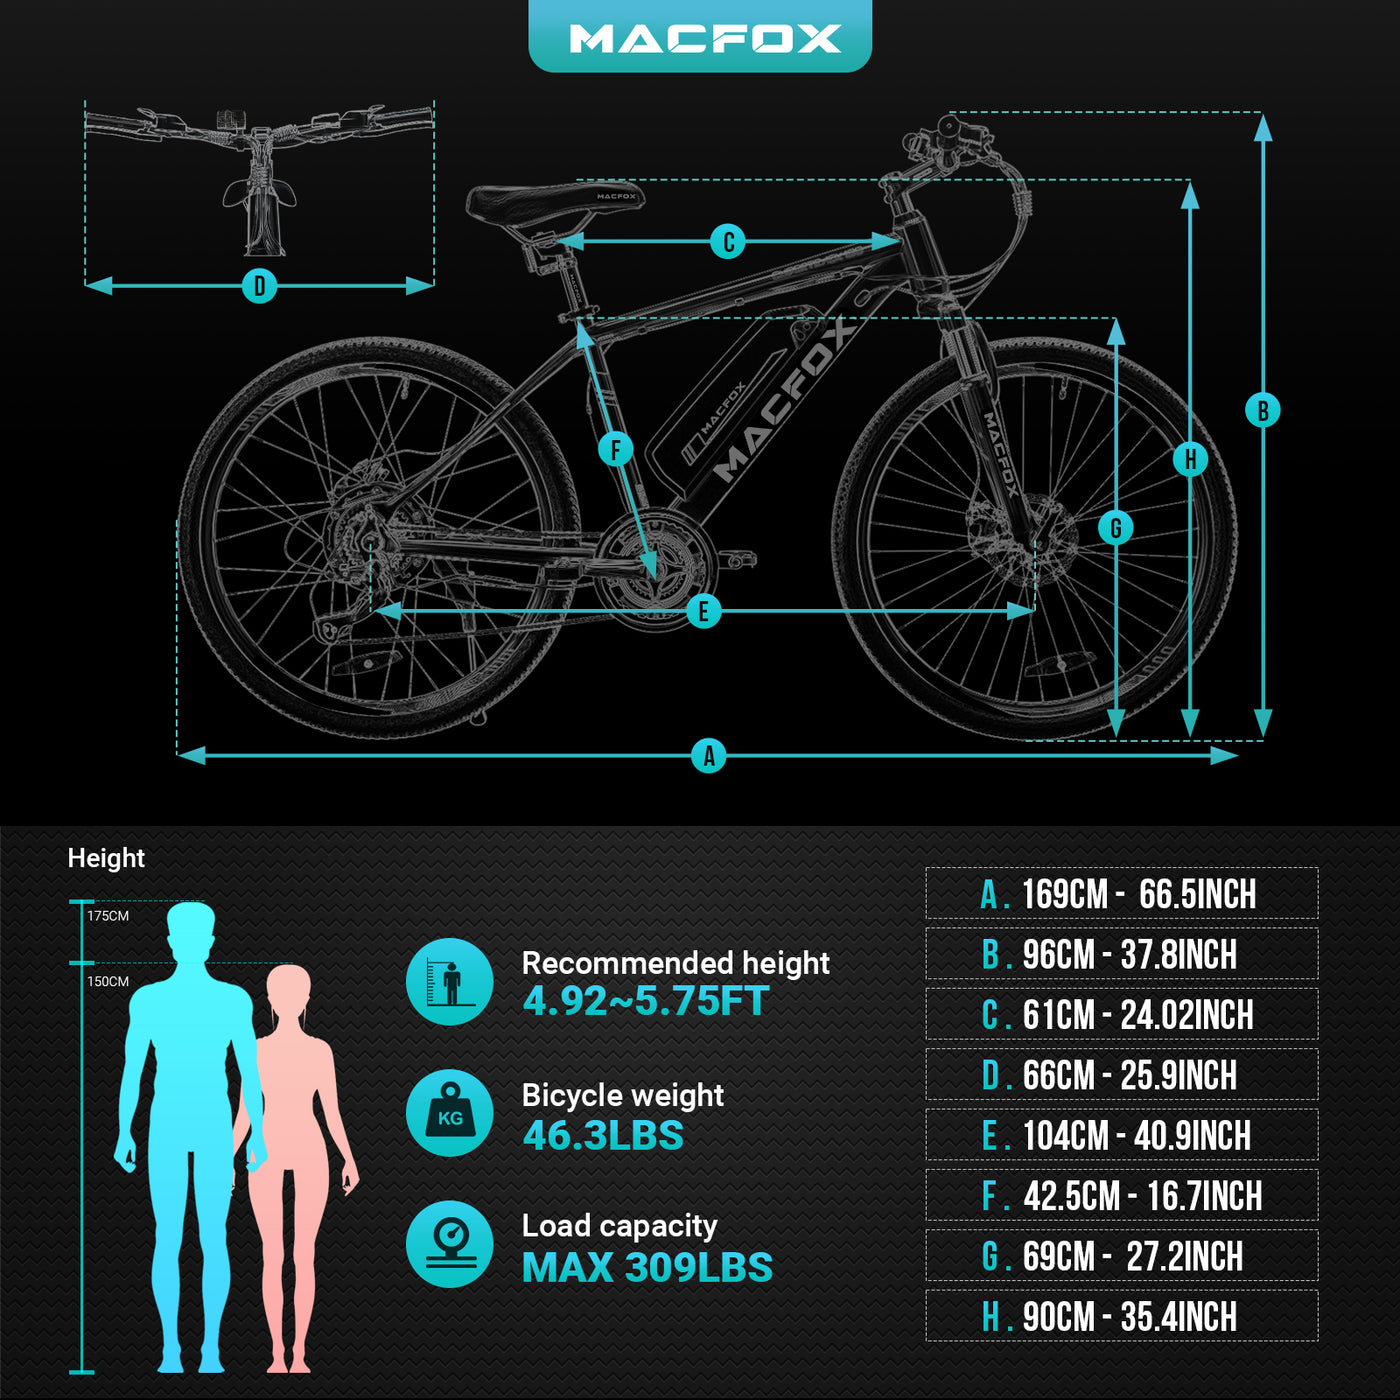 Macfox 26" Electric Bike | Cybertrack 100 - Recommended height